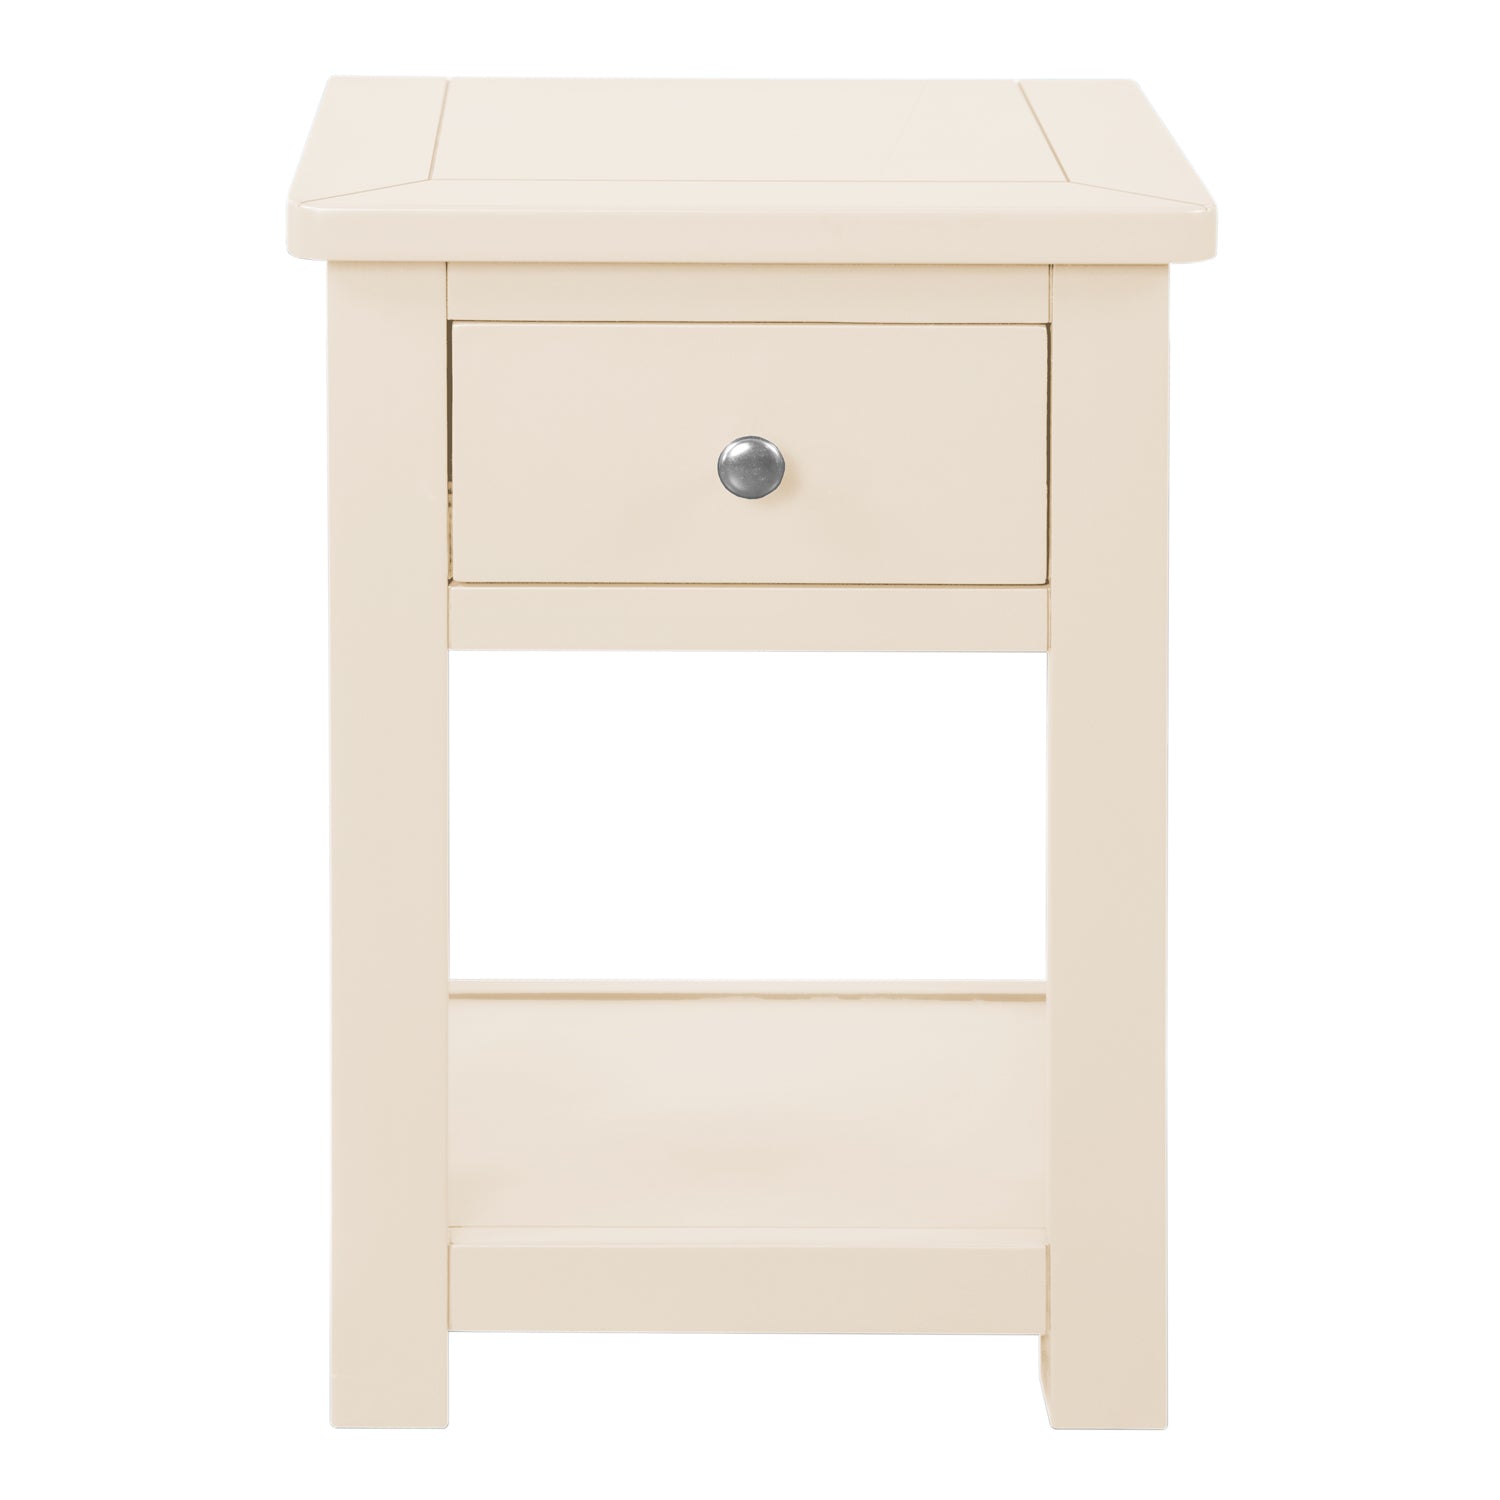 Manor Cream 1 Drawer Bedside Table